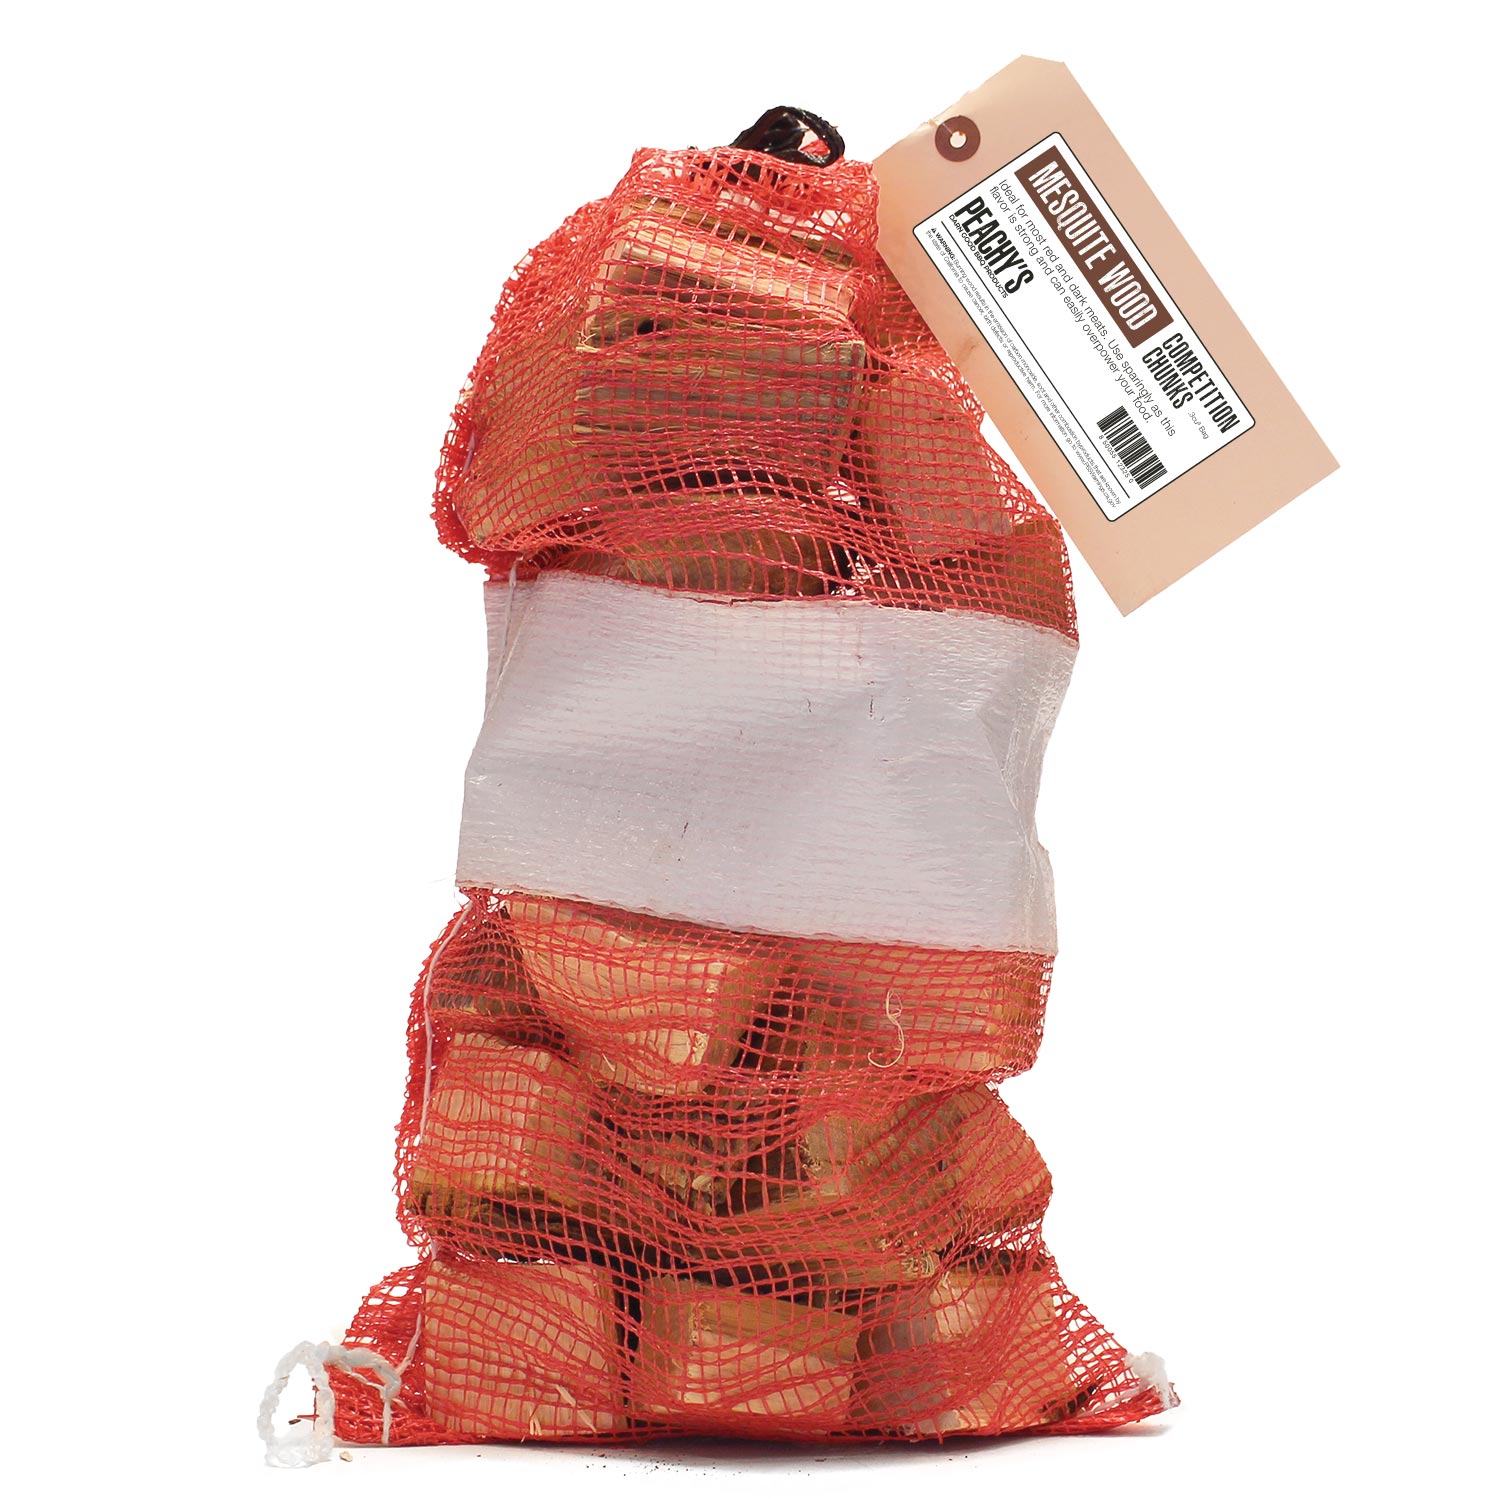 MESQUITE Competition Chunks | .3cu³ Bag by PEACHY'S